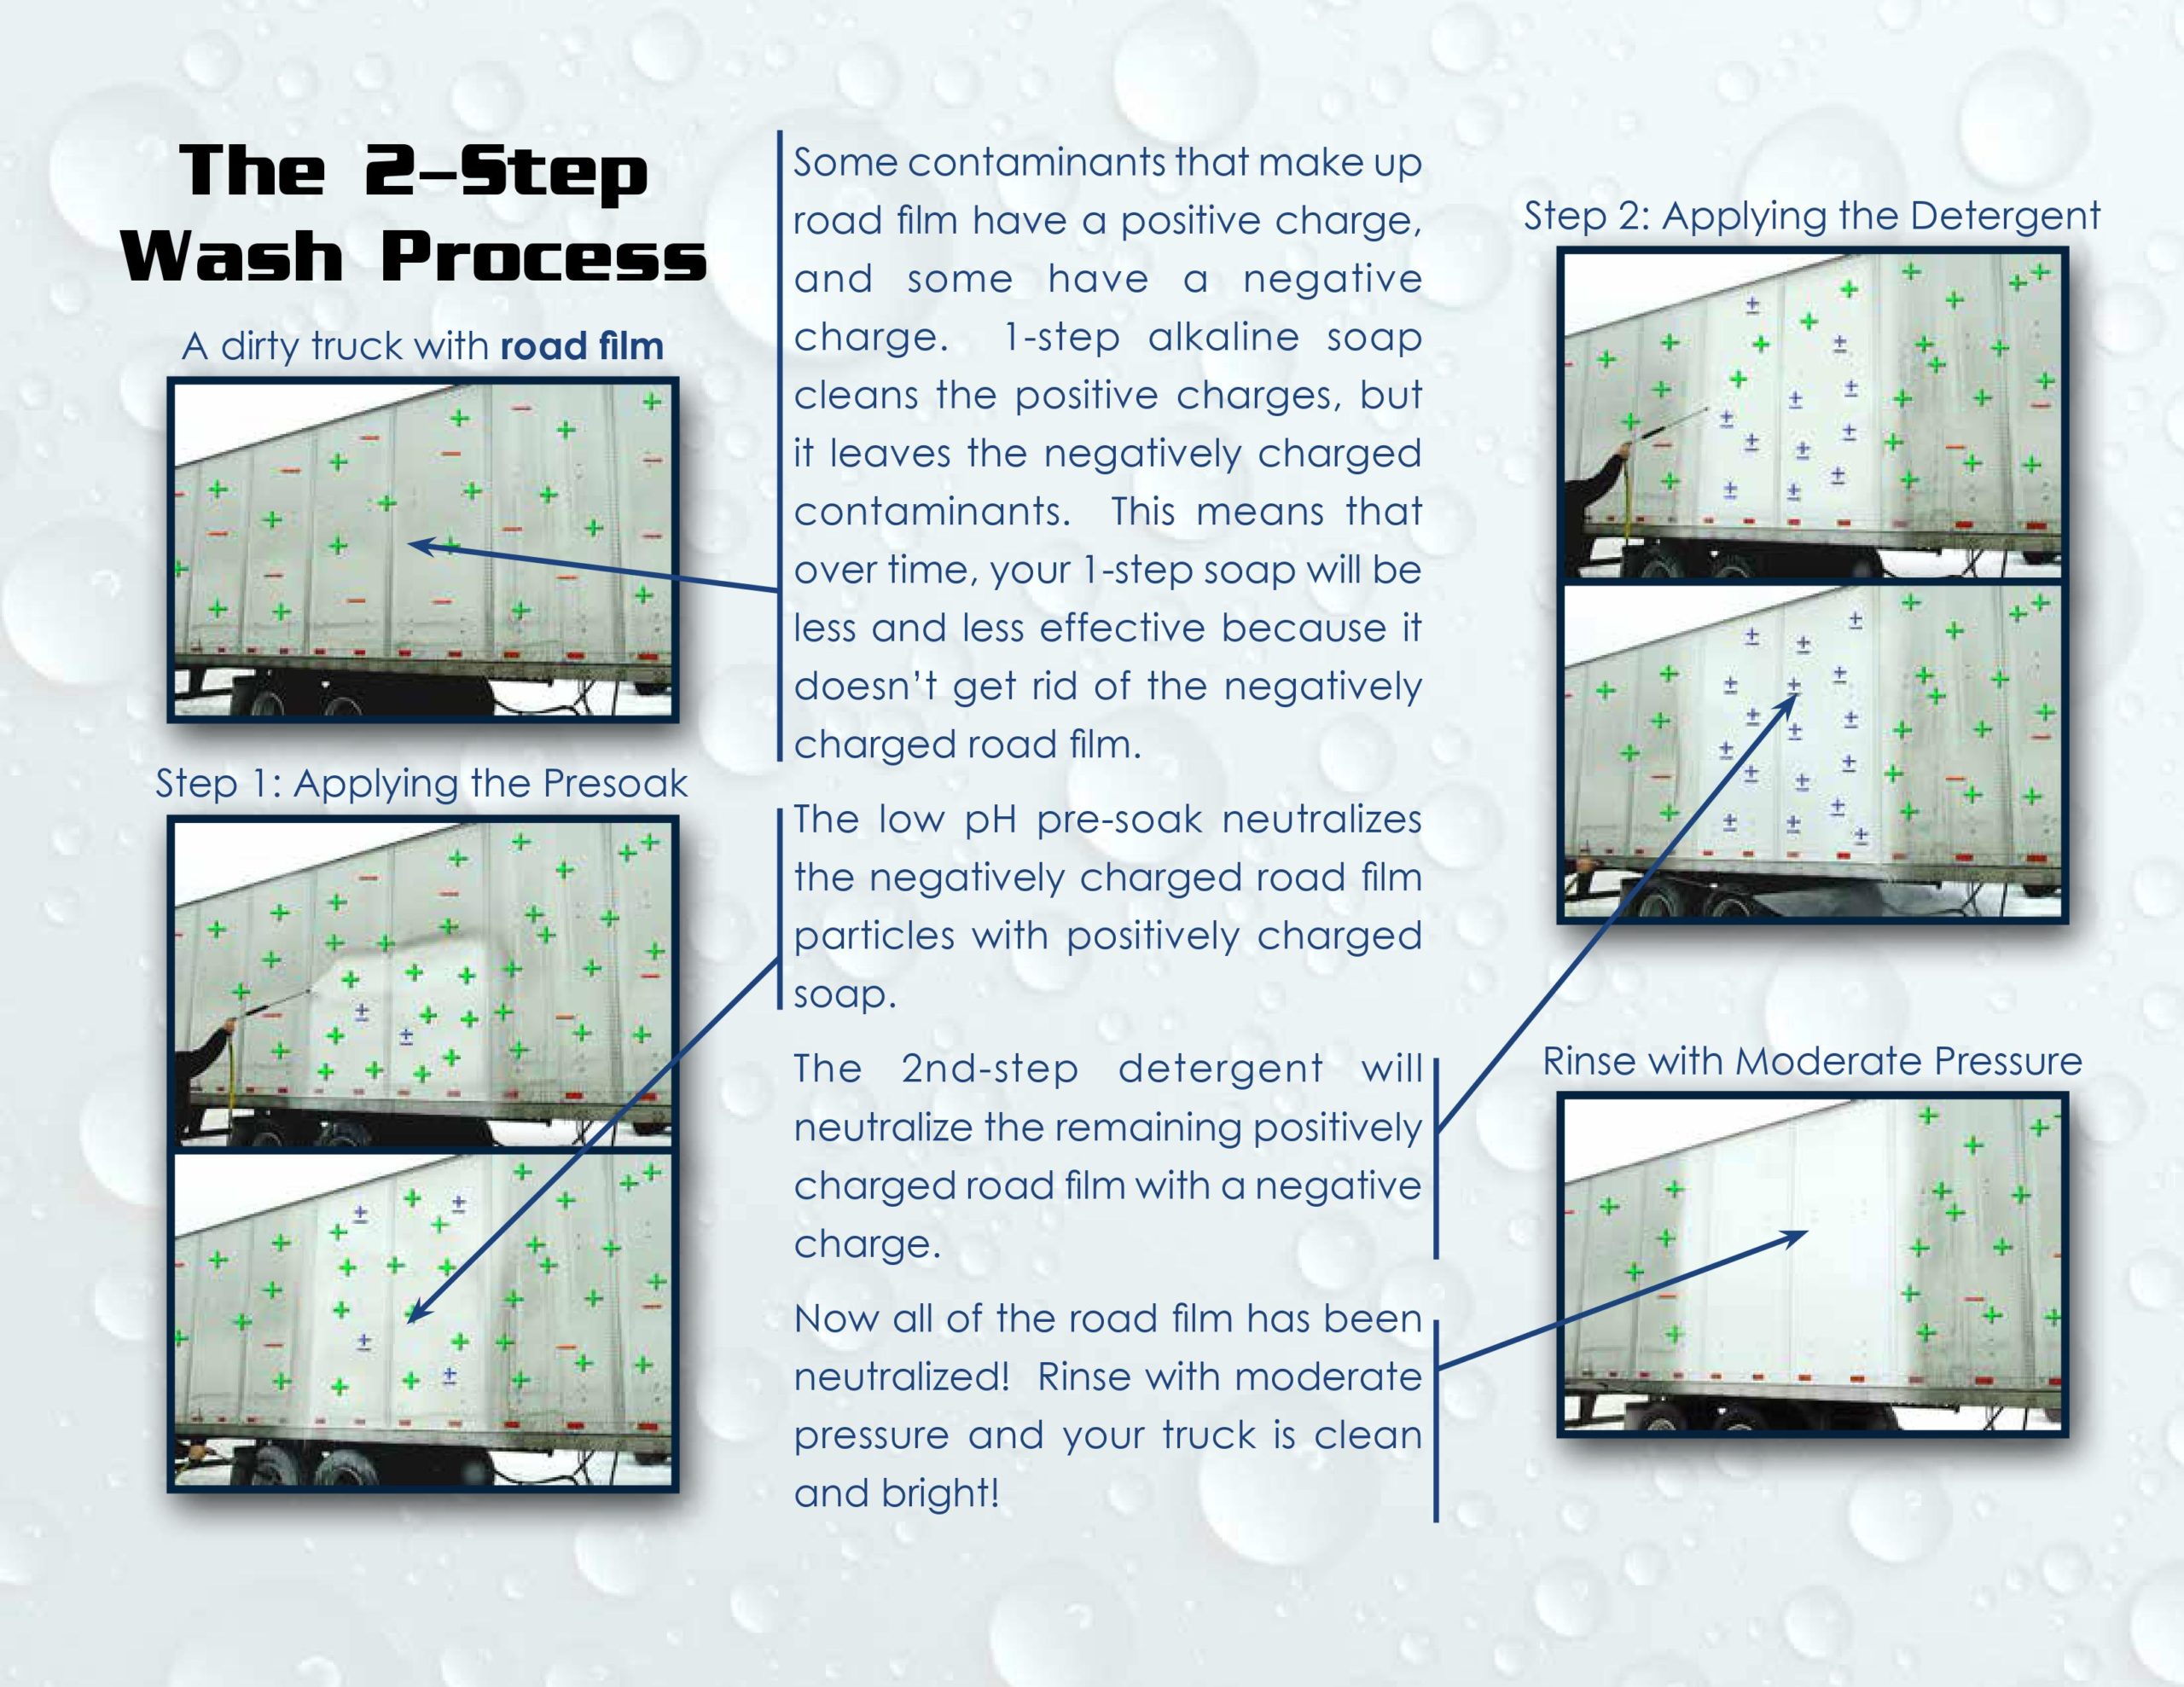 An infographic describing the 2-Step Wash Process.